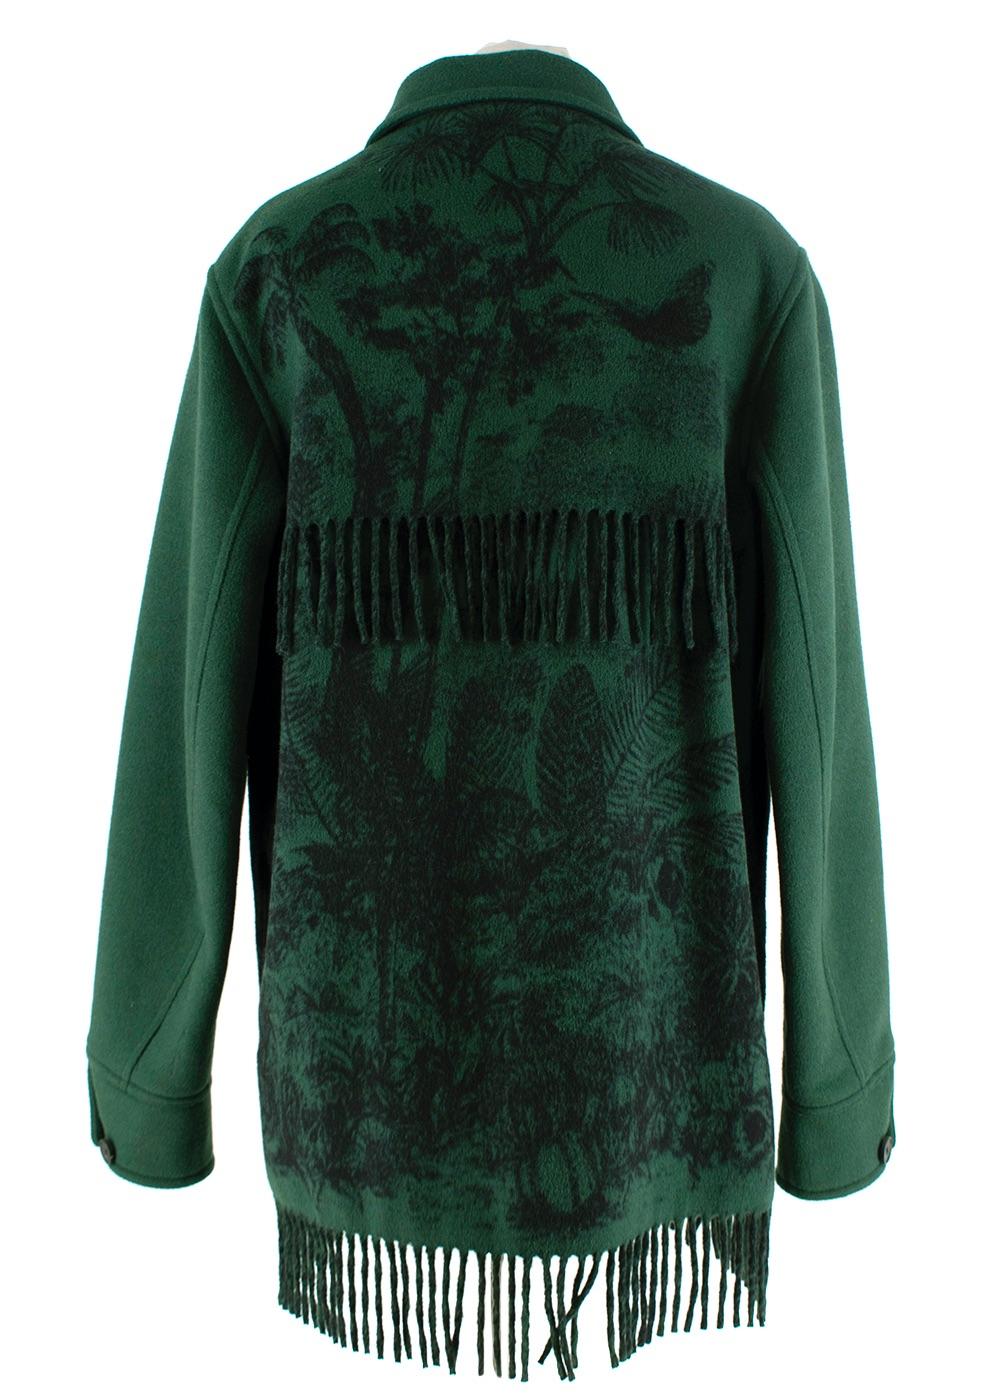 Dior Palm Printed Dark Green Felt Jacket

- Supersoft rabbit-fur felt in a rich dark green hue
- Palm printed motif on the back and sides with fringing
- Point collar, zip through 
- Button finished cuffs

Materials 
outer
50% Rabbit Hair 
50%